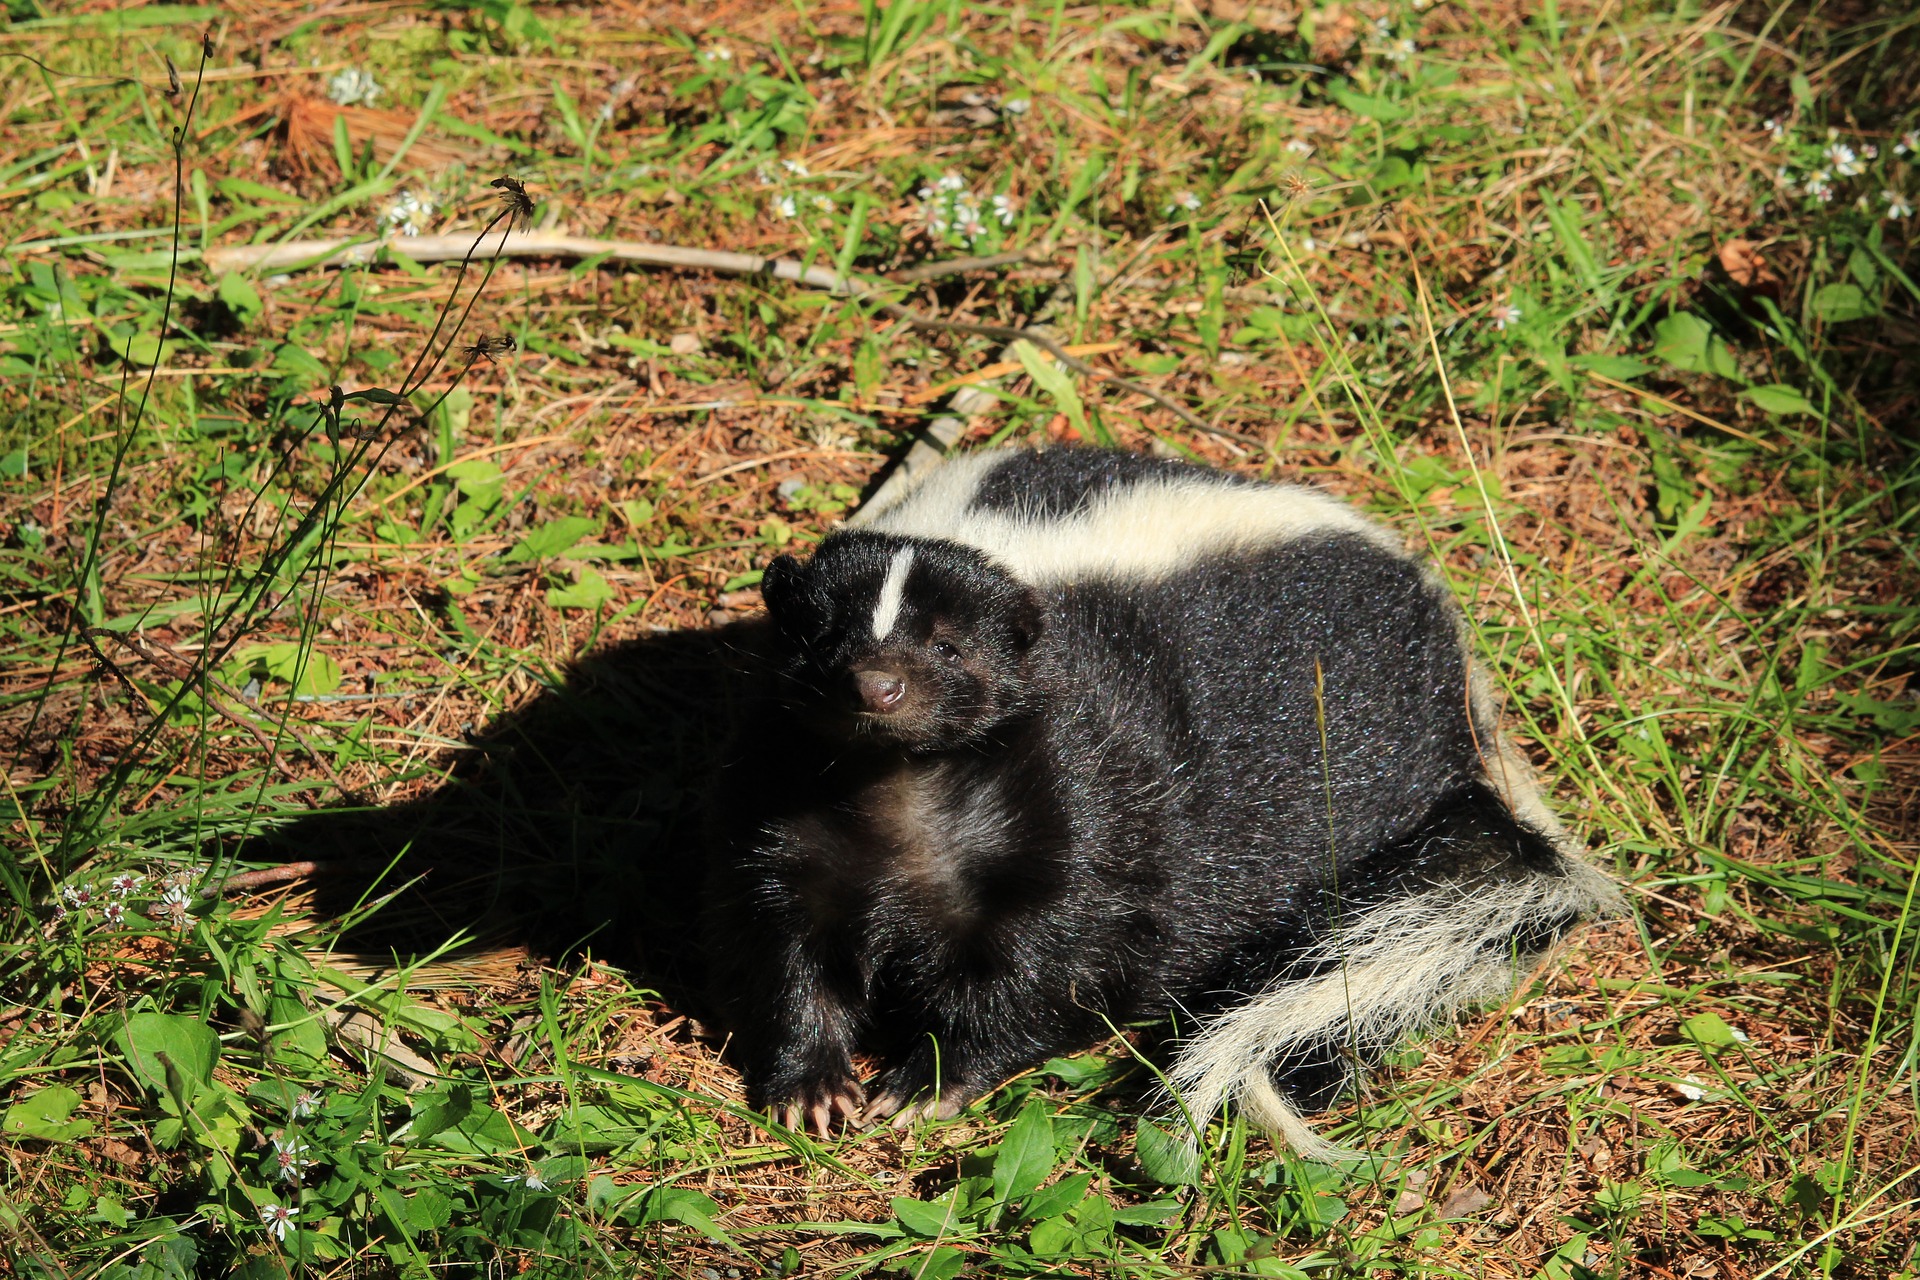 What Can be Done About Skunks Digging Up Lawn - Animal Control Specialists